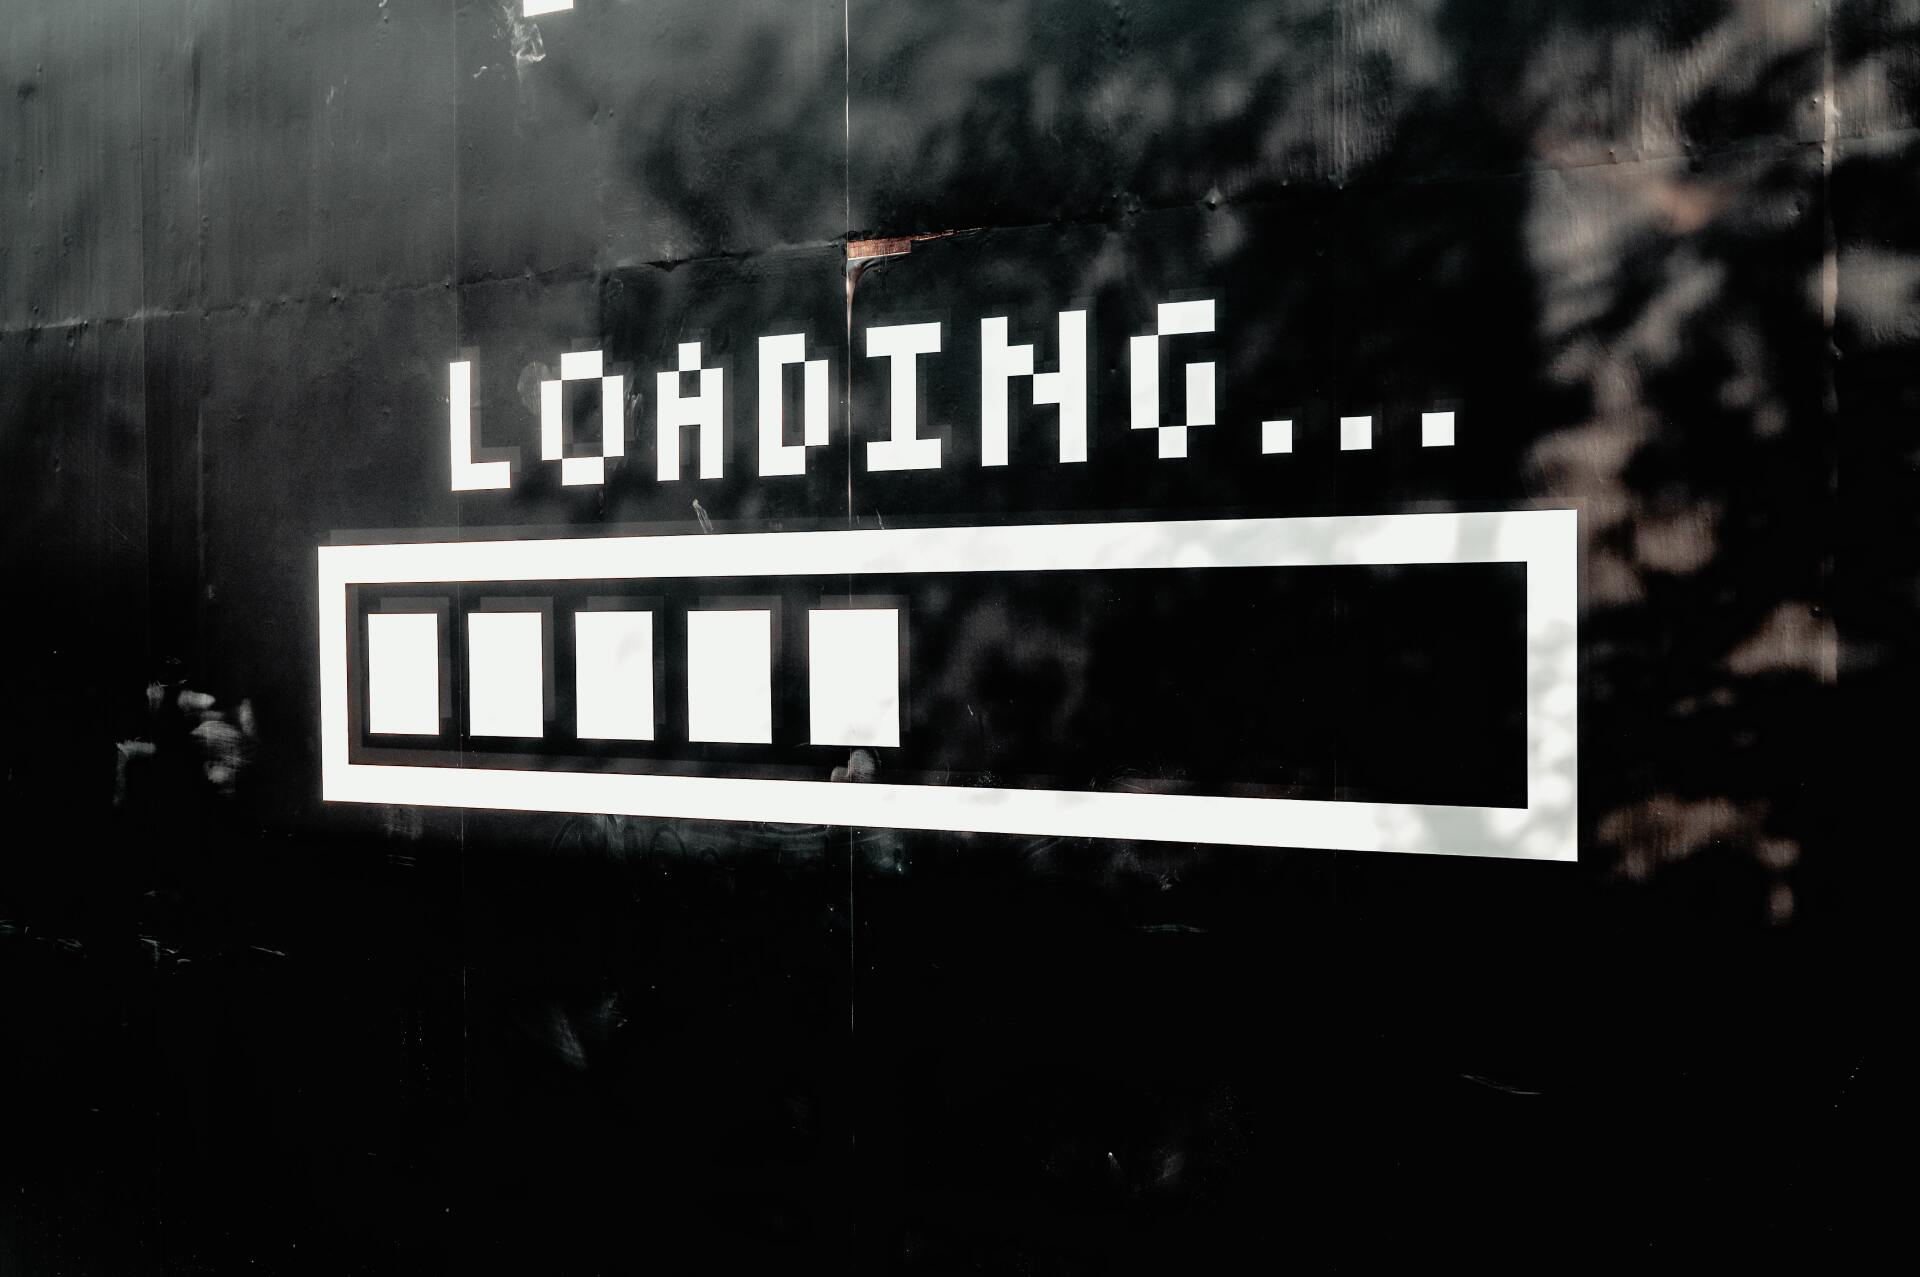 an image showing a loading bar which depicts slow loading